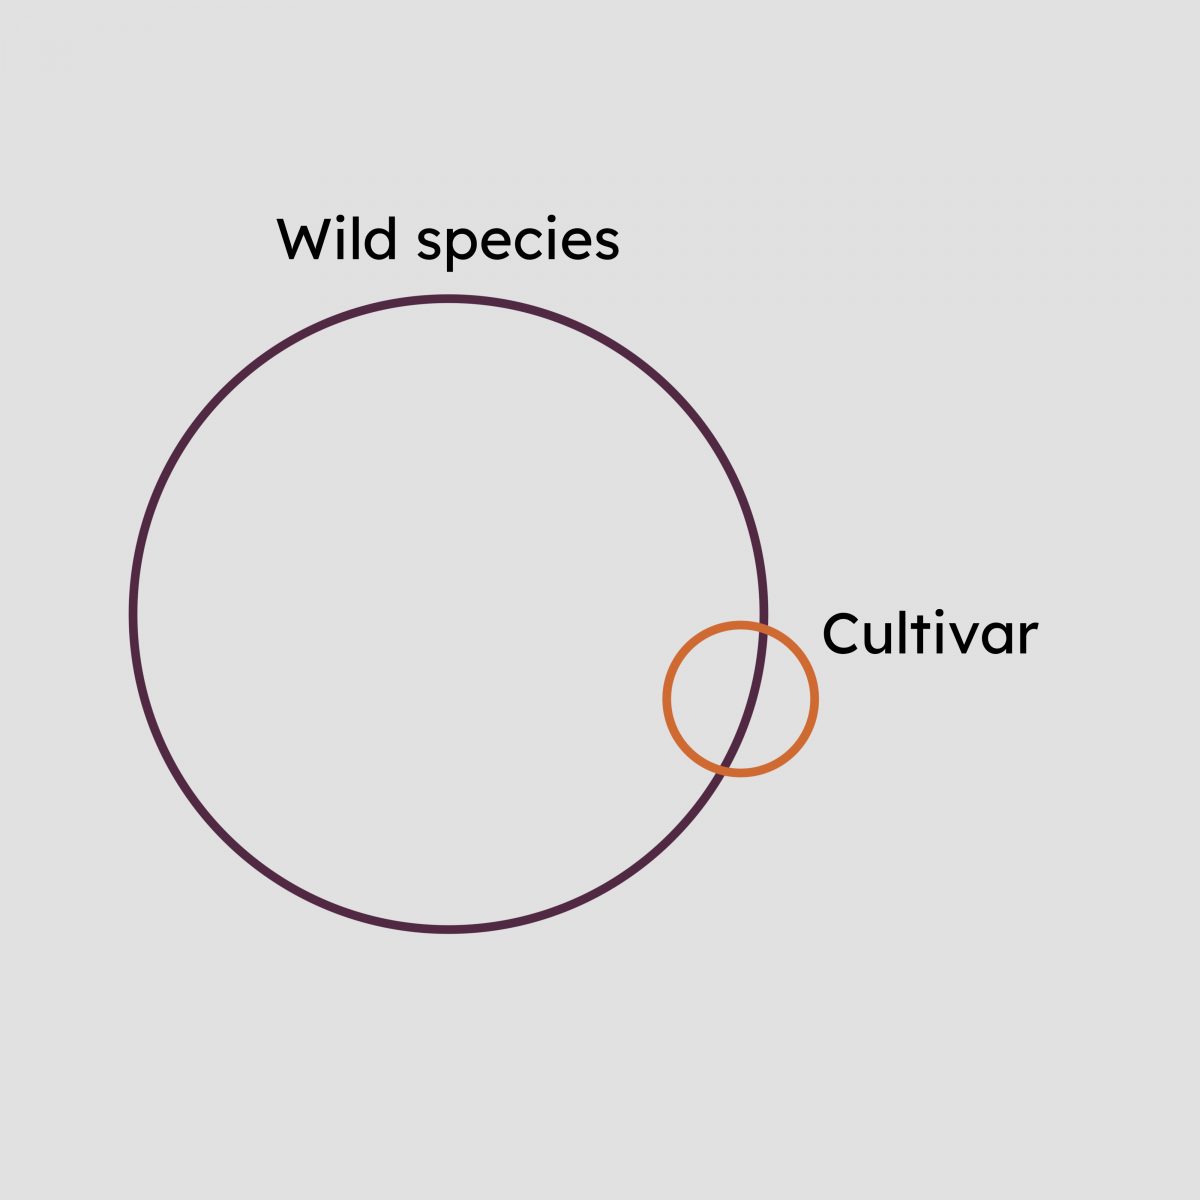 Large circle labelled "wild species", with a smaller circle labelled "cultivar" overlapping its edge.